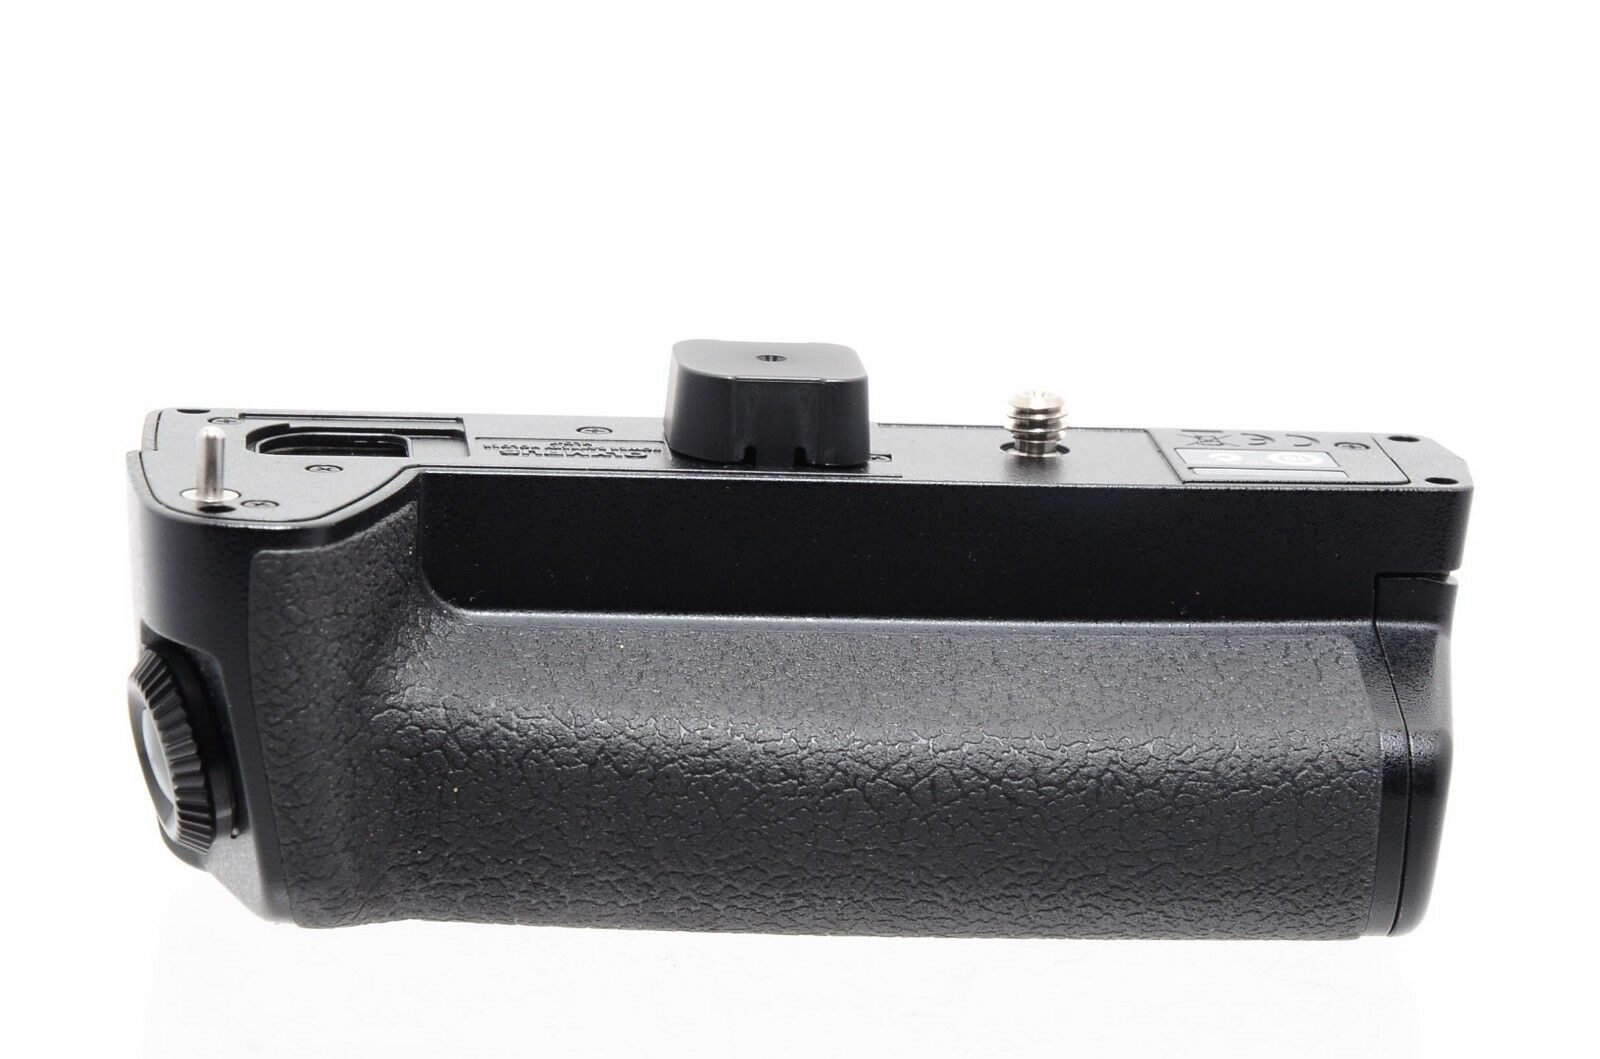 Product Image of Olympus HLD-7 Battery Grip FOR OM-D E-M1